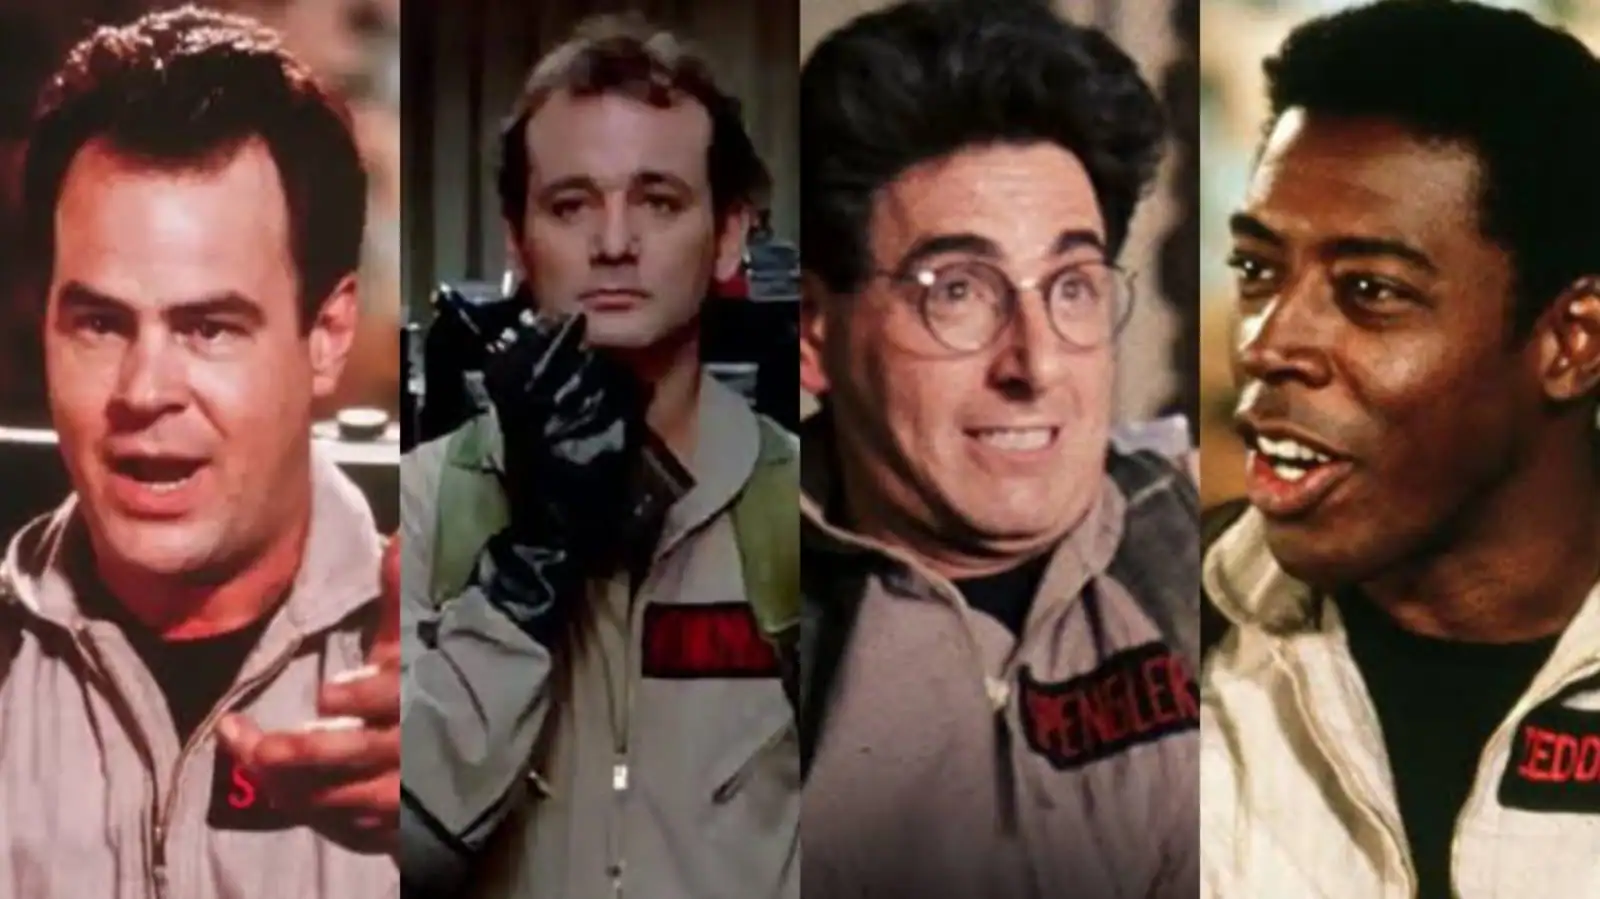 What Are The 4 Original Ghostbusters Names?